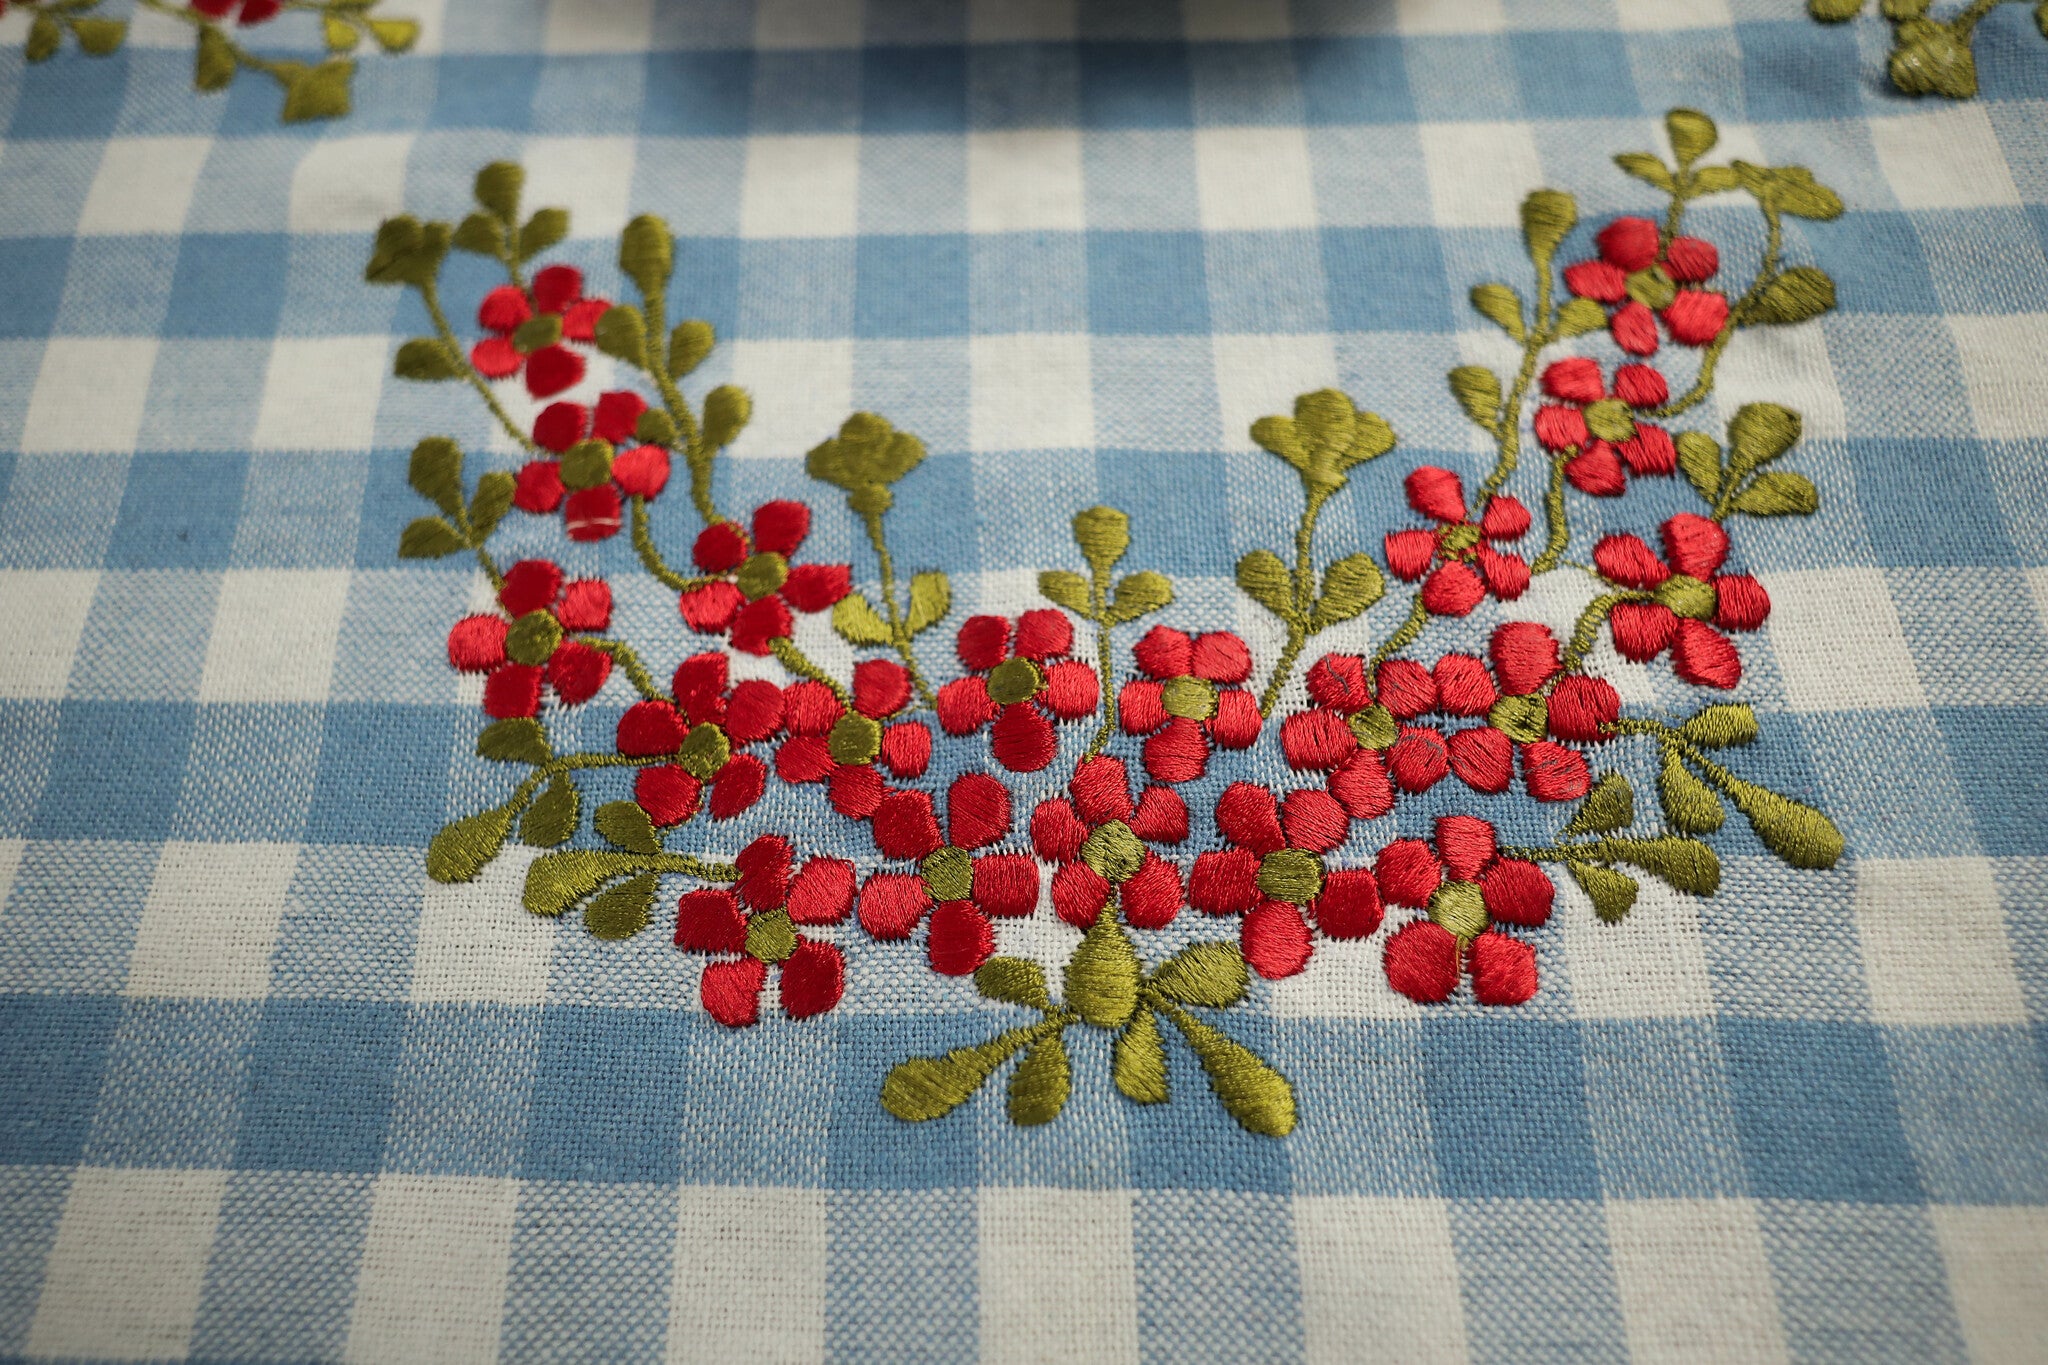 Blue Gingham print Table Cloth with red floral embroidery